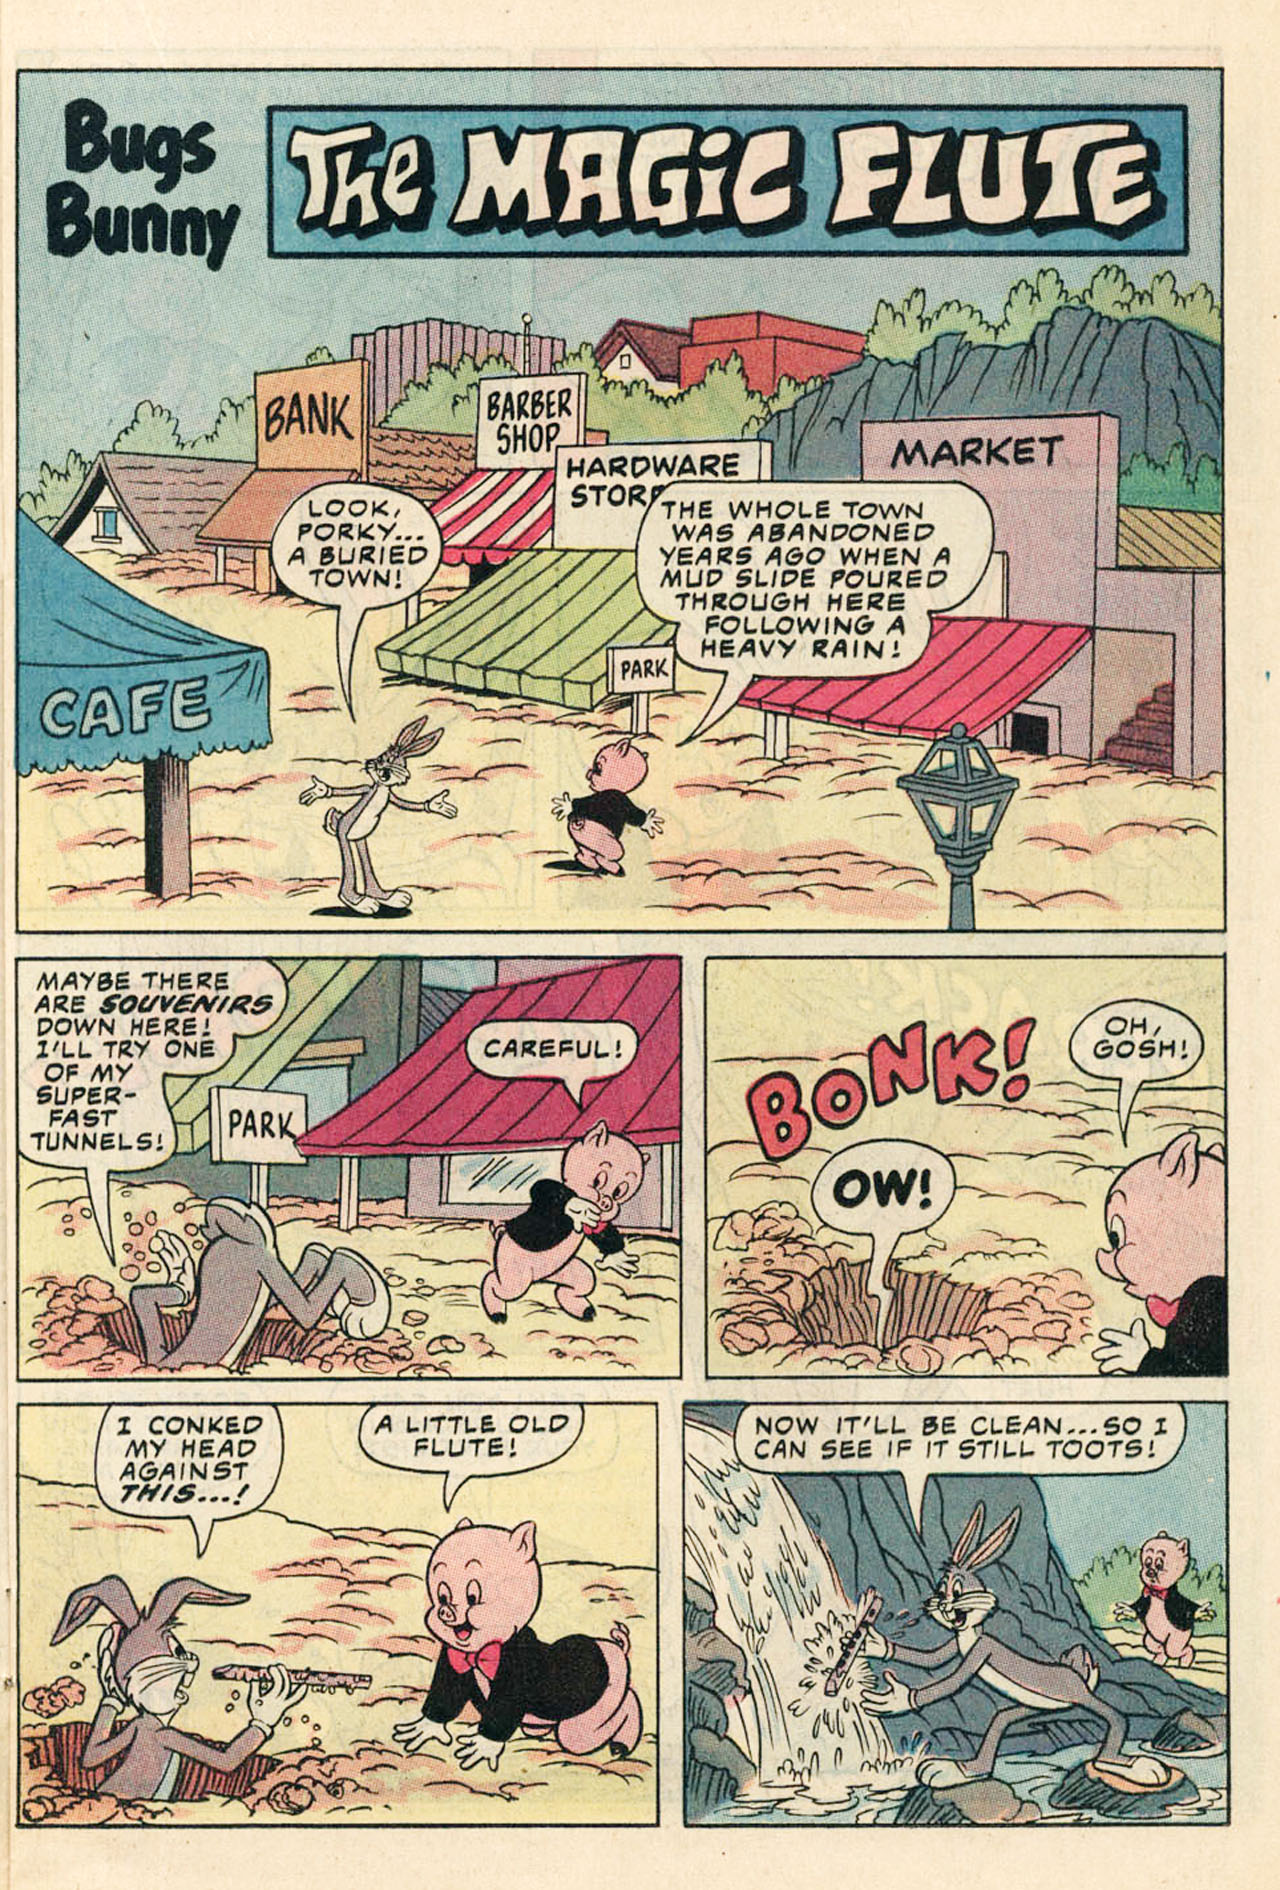 Read online Bugs Bunny comic -  Issue #230 - 15